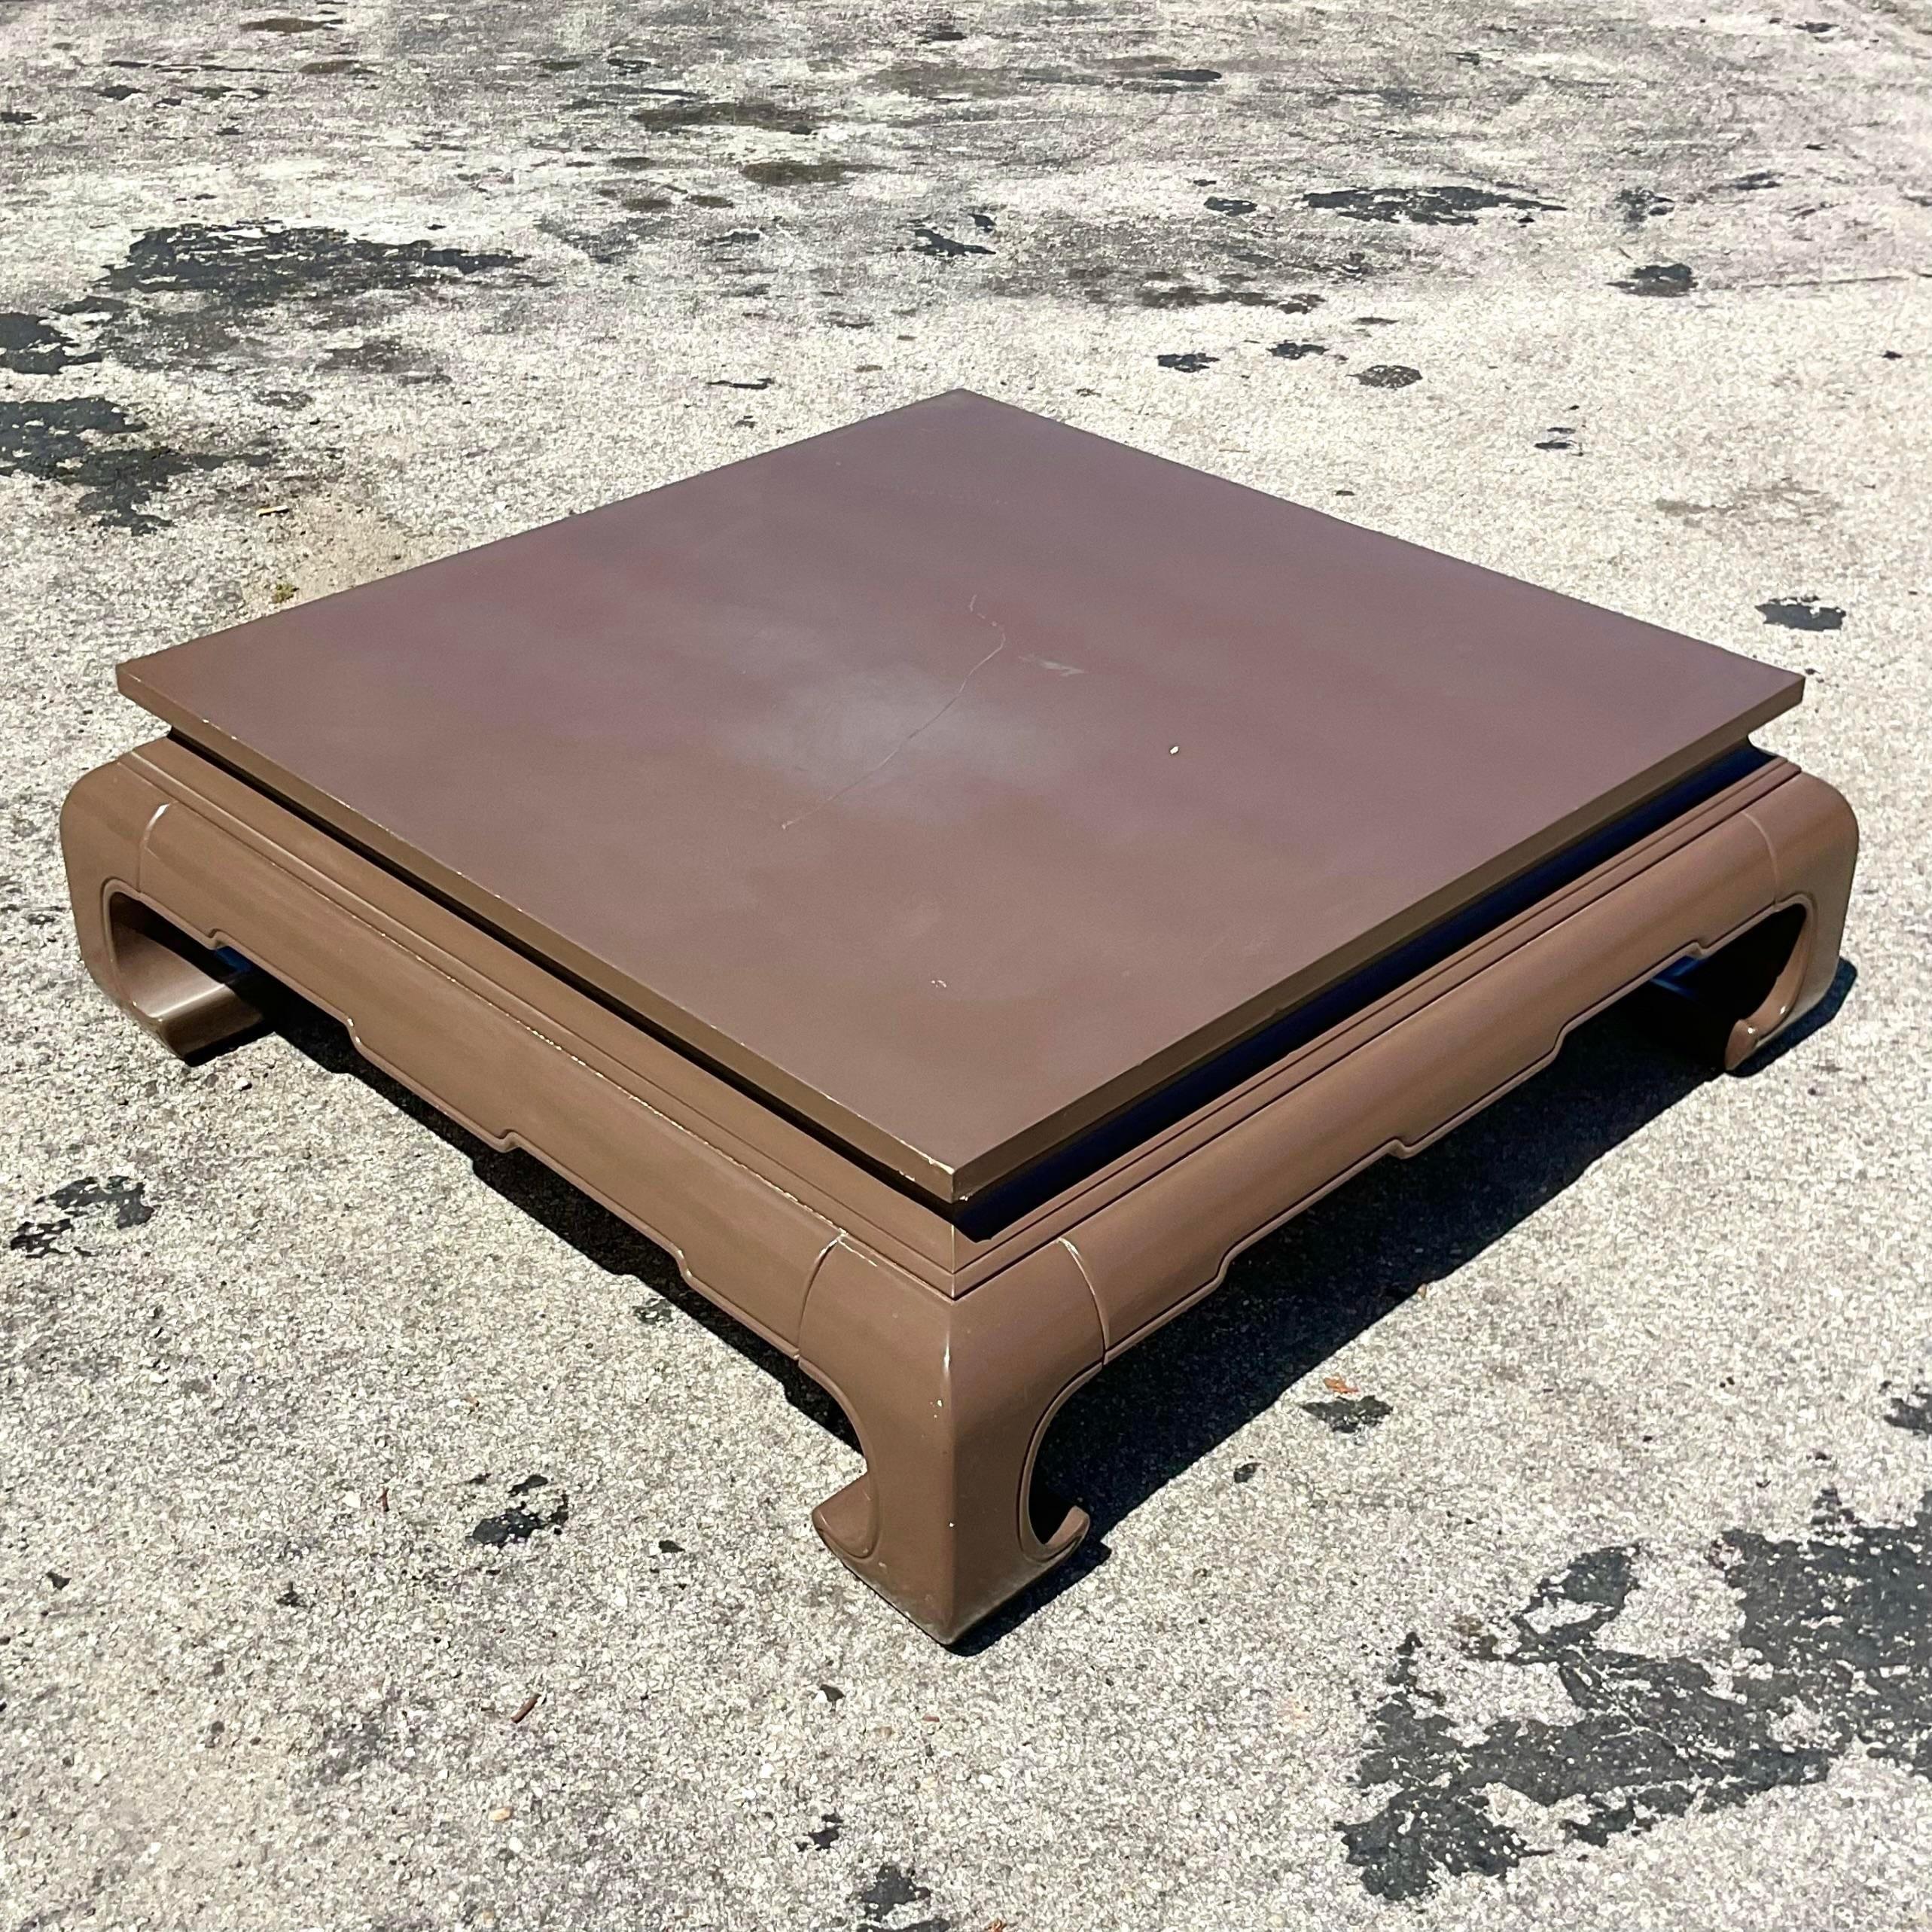 A beautifully crafted vintage coffee table. The classic Ming shape with lots of surface space for your treasures. Acquired at a Palm Beach estate.